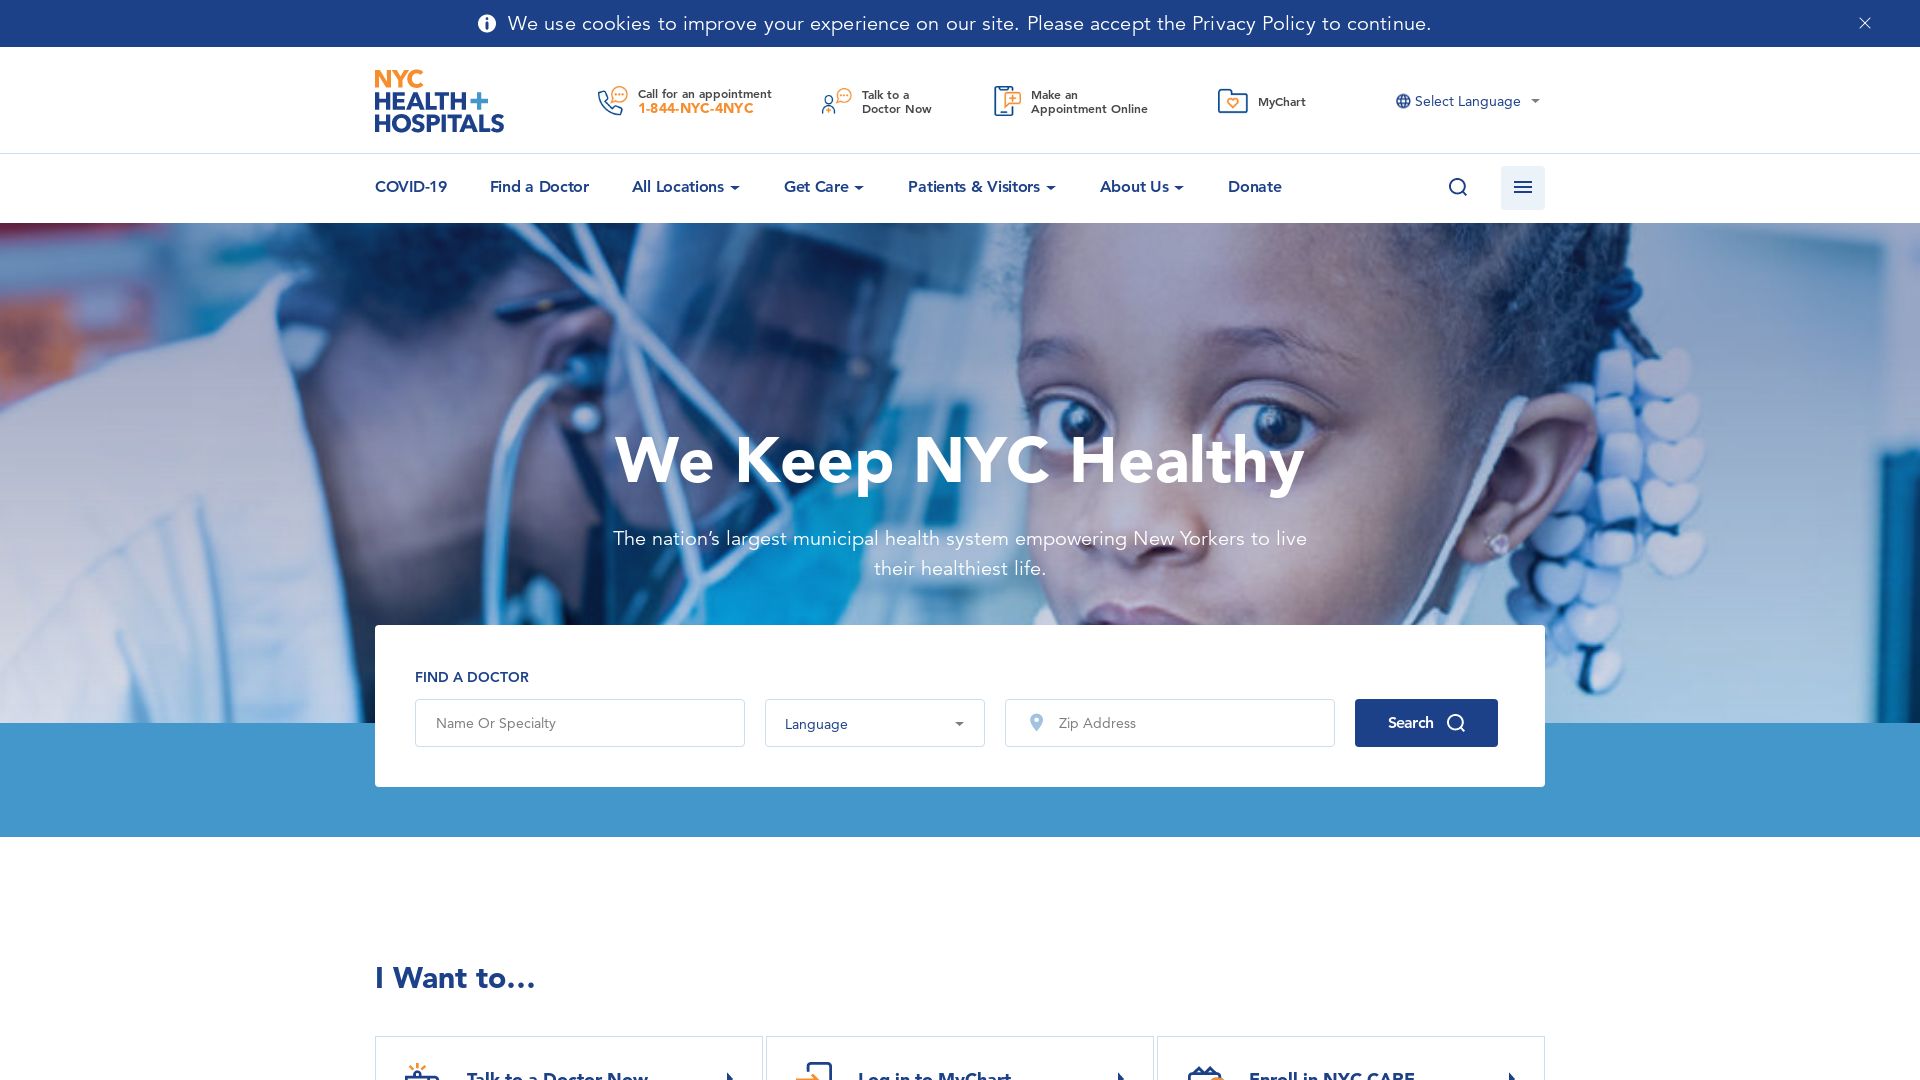 Website status nychealthandhospitals.org is   ONLINE